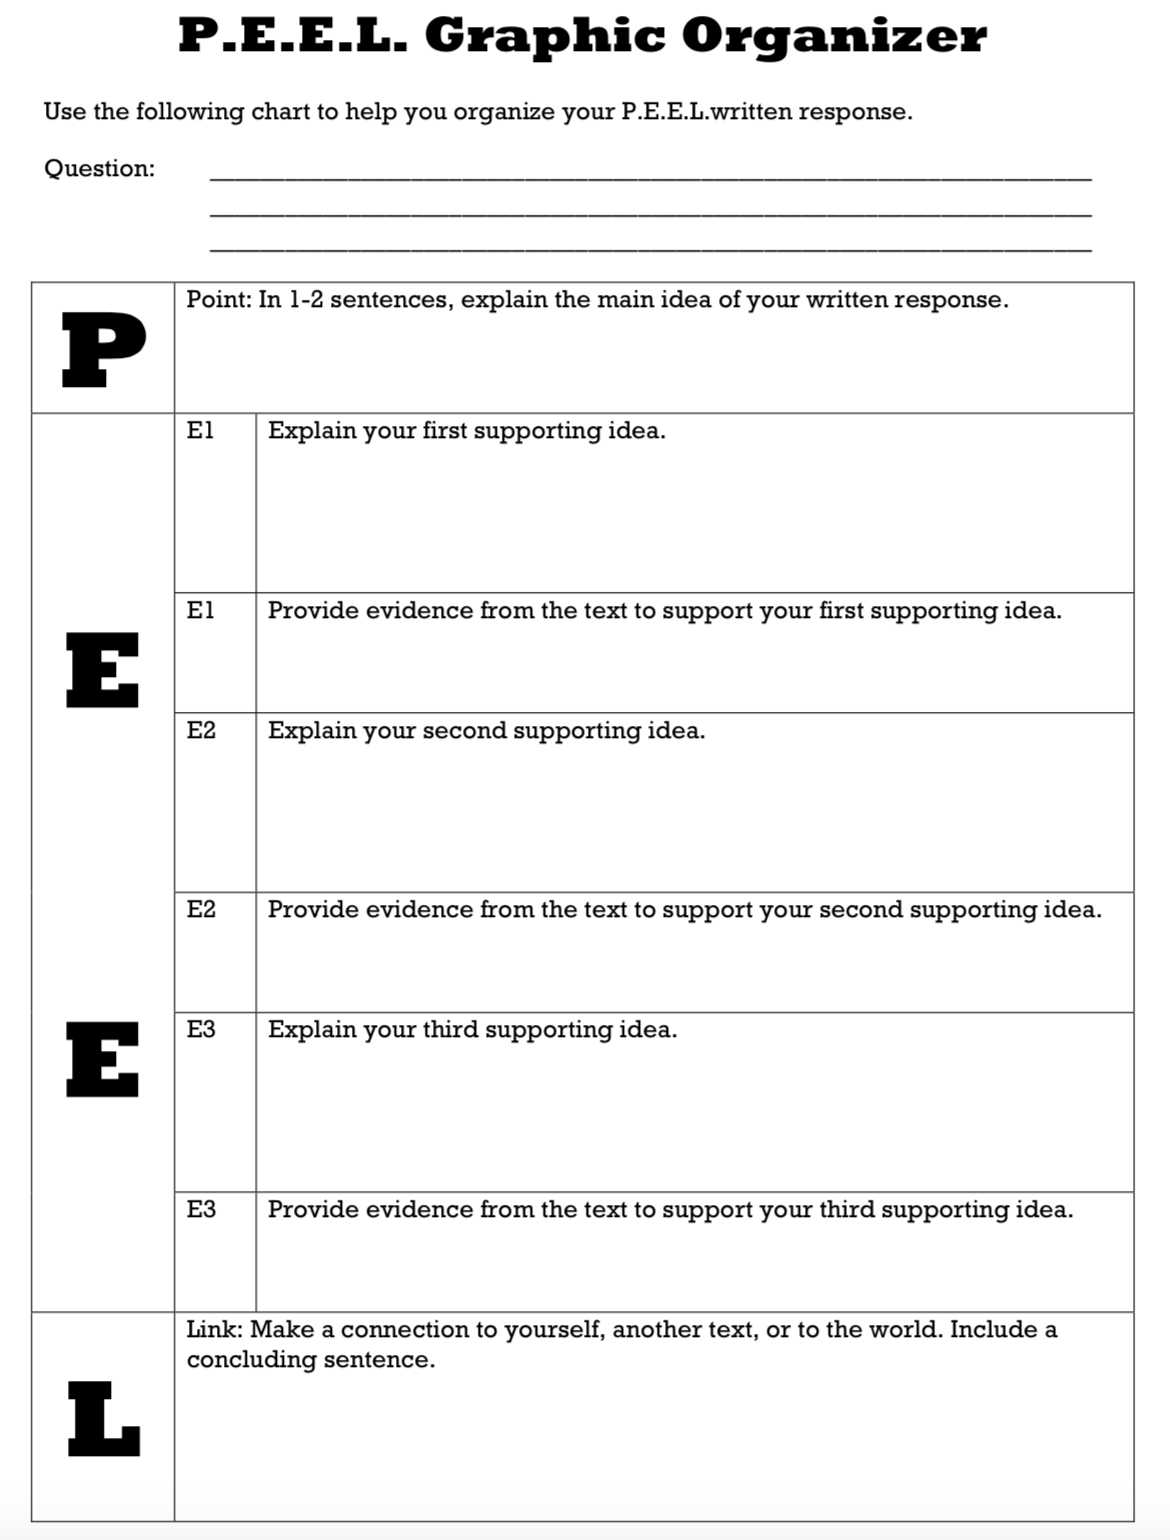 7th Grade Worksheets Free Printable Also Tip Of the Week Peel Graphic organizer